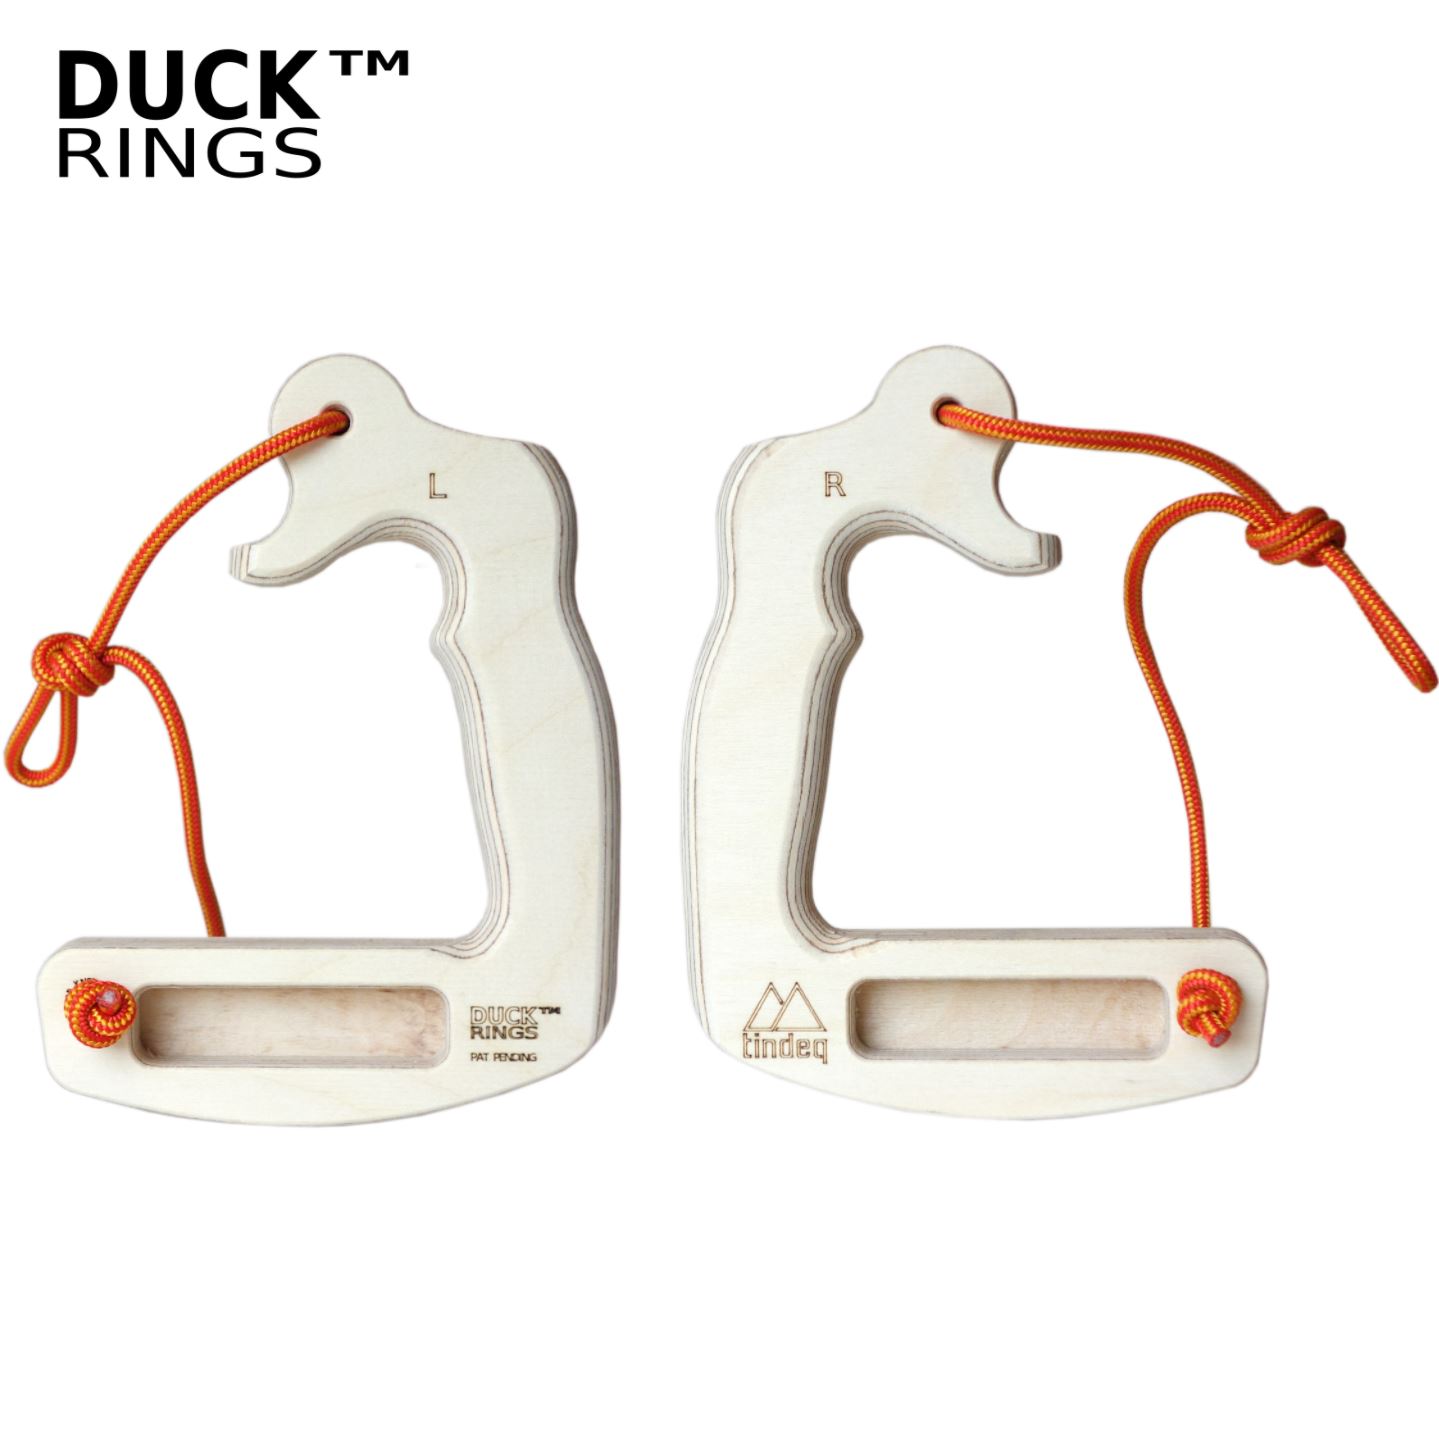 Analist Wacht even Storing Duck Rings – tindeq